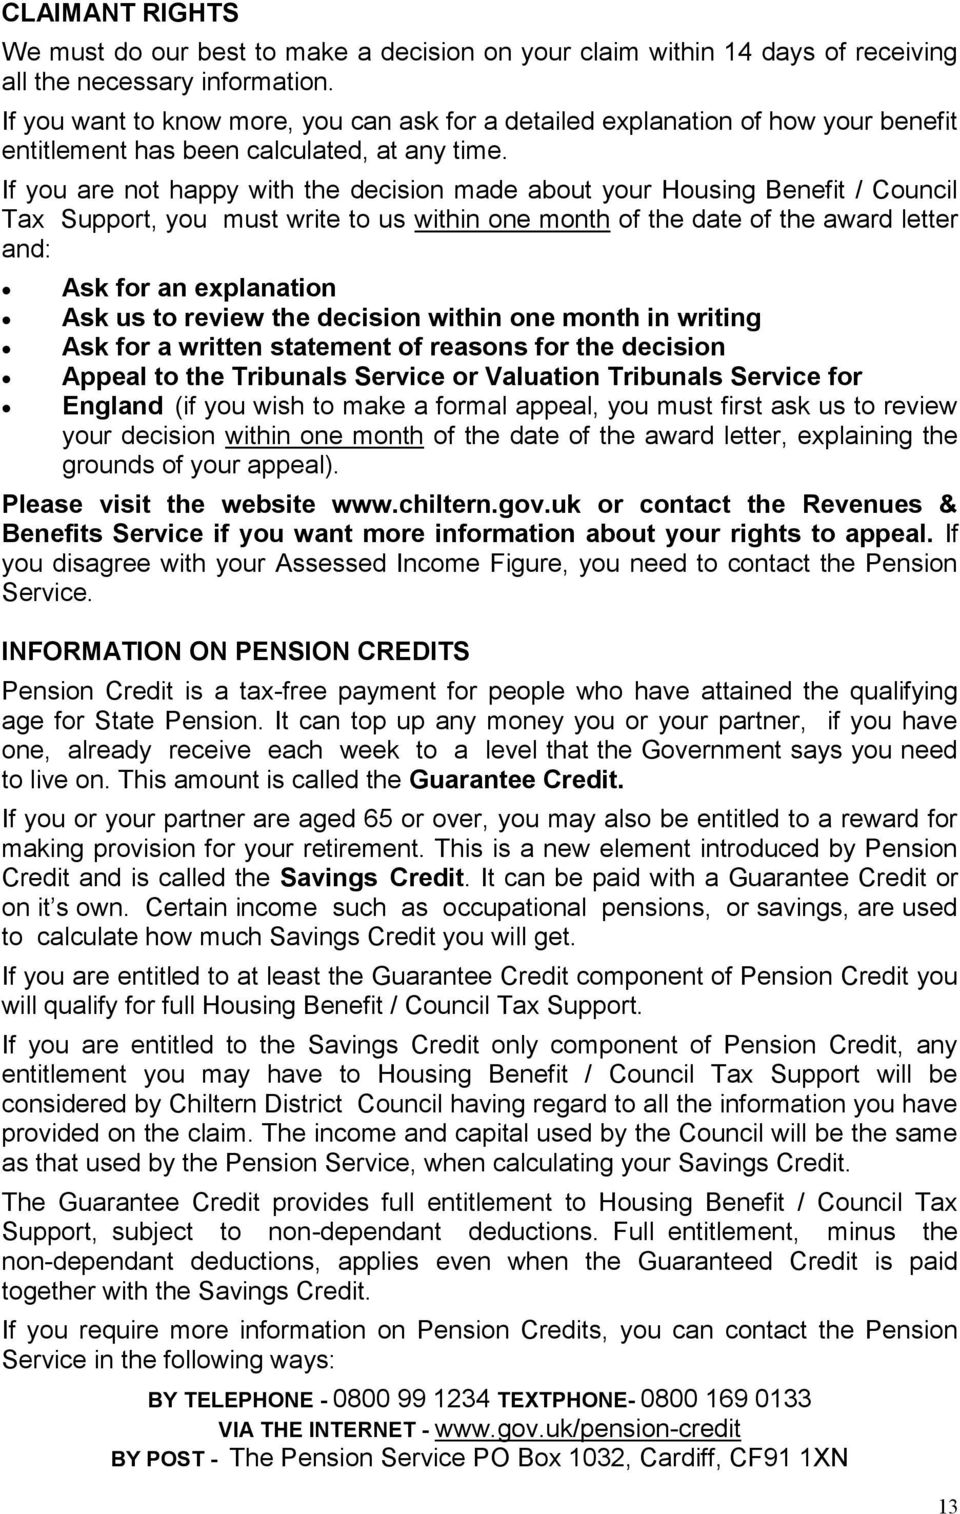 If you are not happy with the decision made about your Housing Benefit / Council Tax Support, you must write to us within one month of the date of the award letter and: Ask for an explanation Ask us